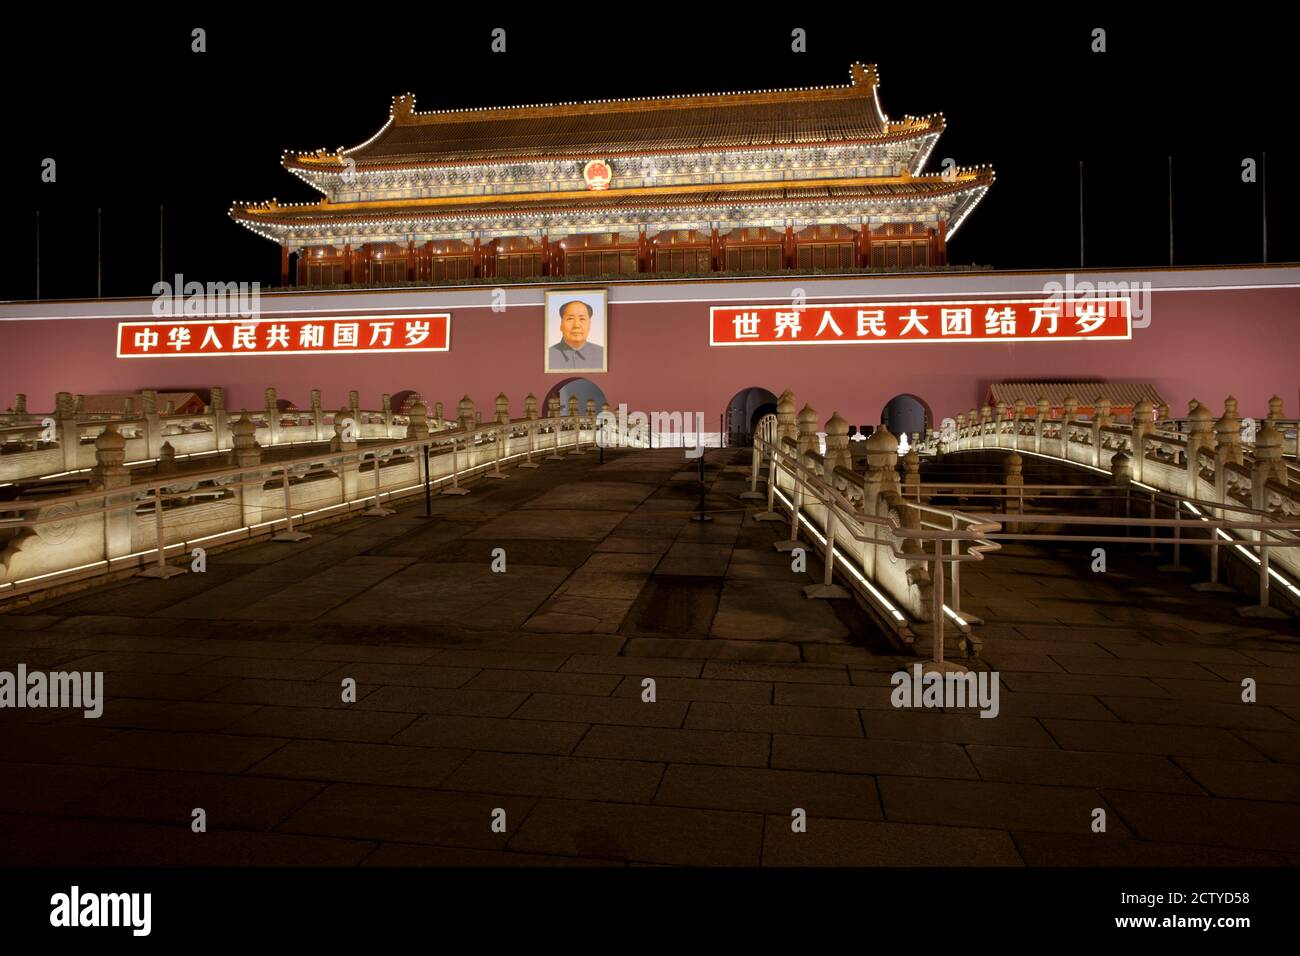 Facade of a palace at night, Tiananmen Gate Of Heavenly Peace, Tiananmen Square, Forbidden City, Beijing, China Stock Photo